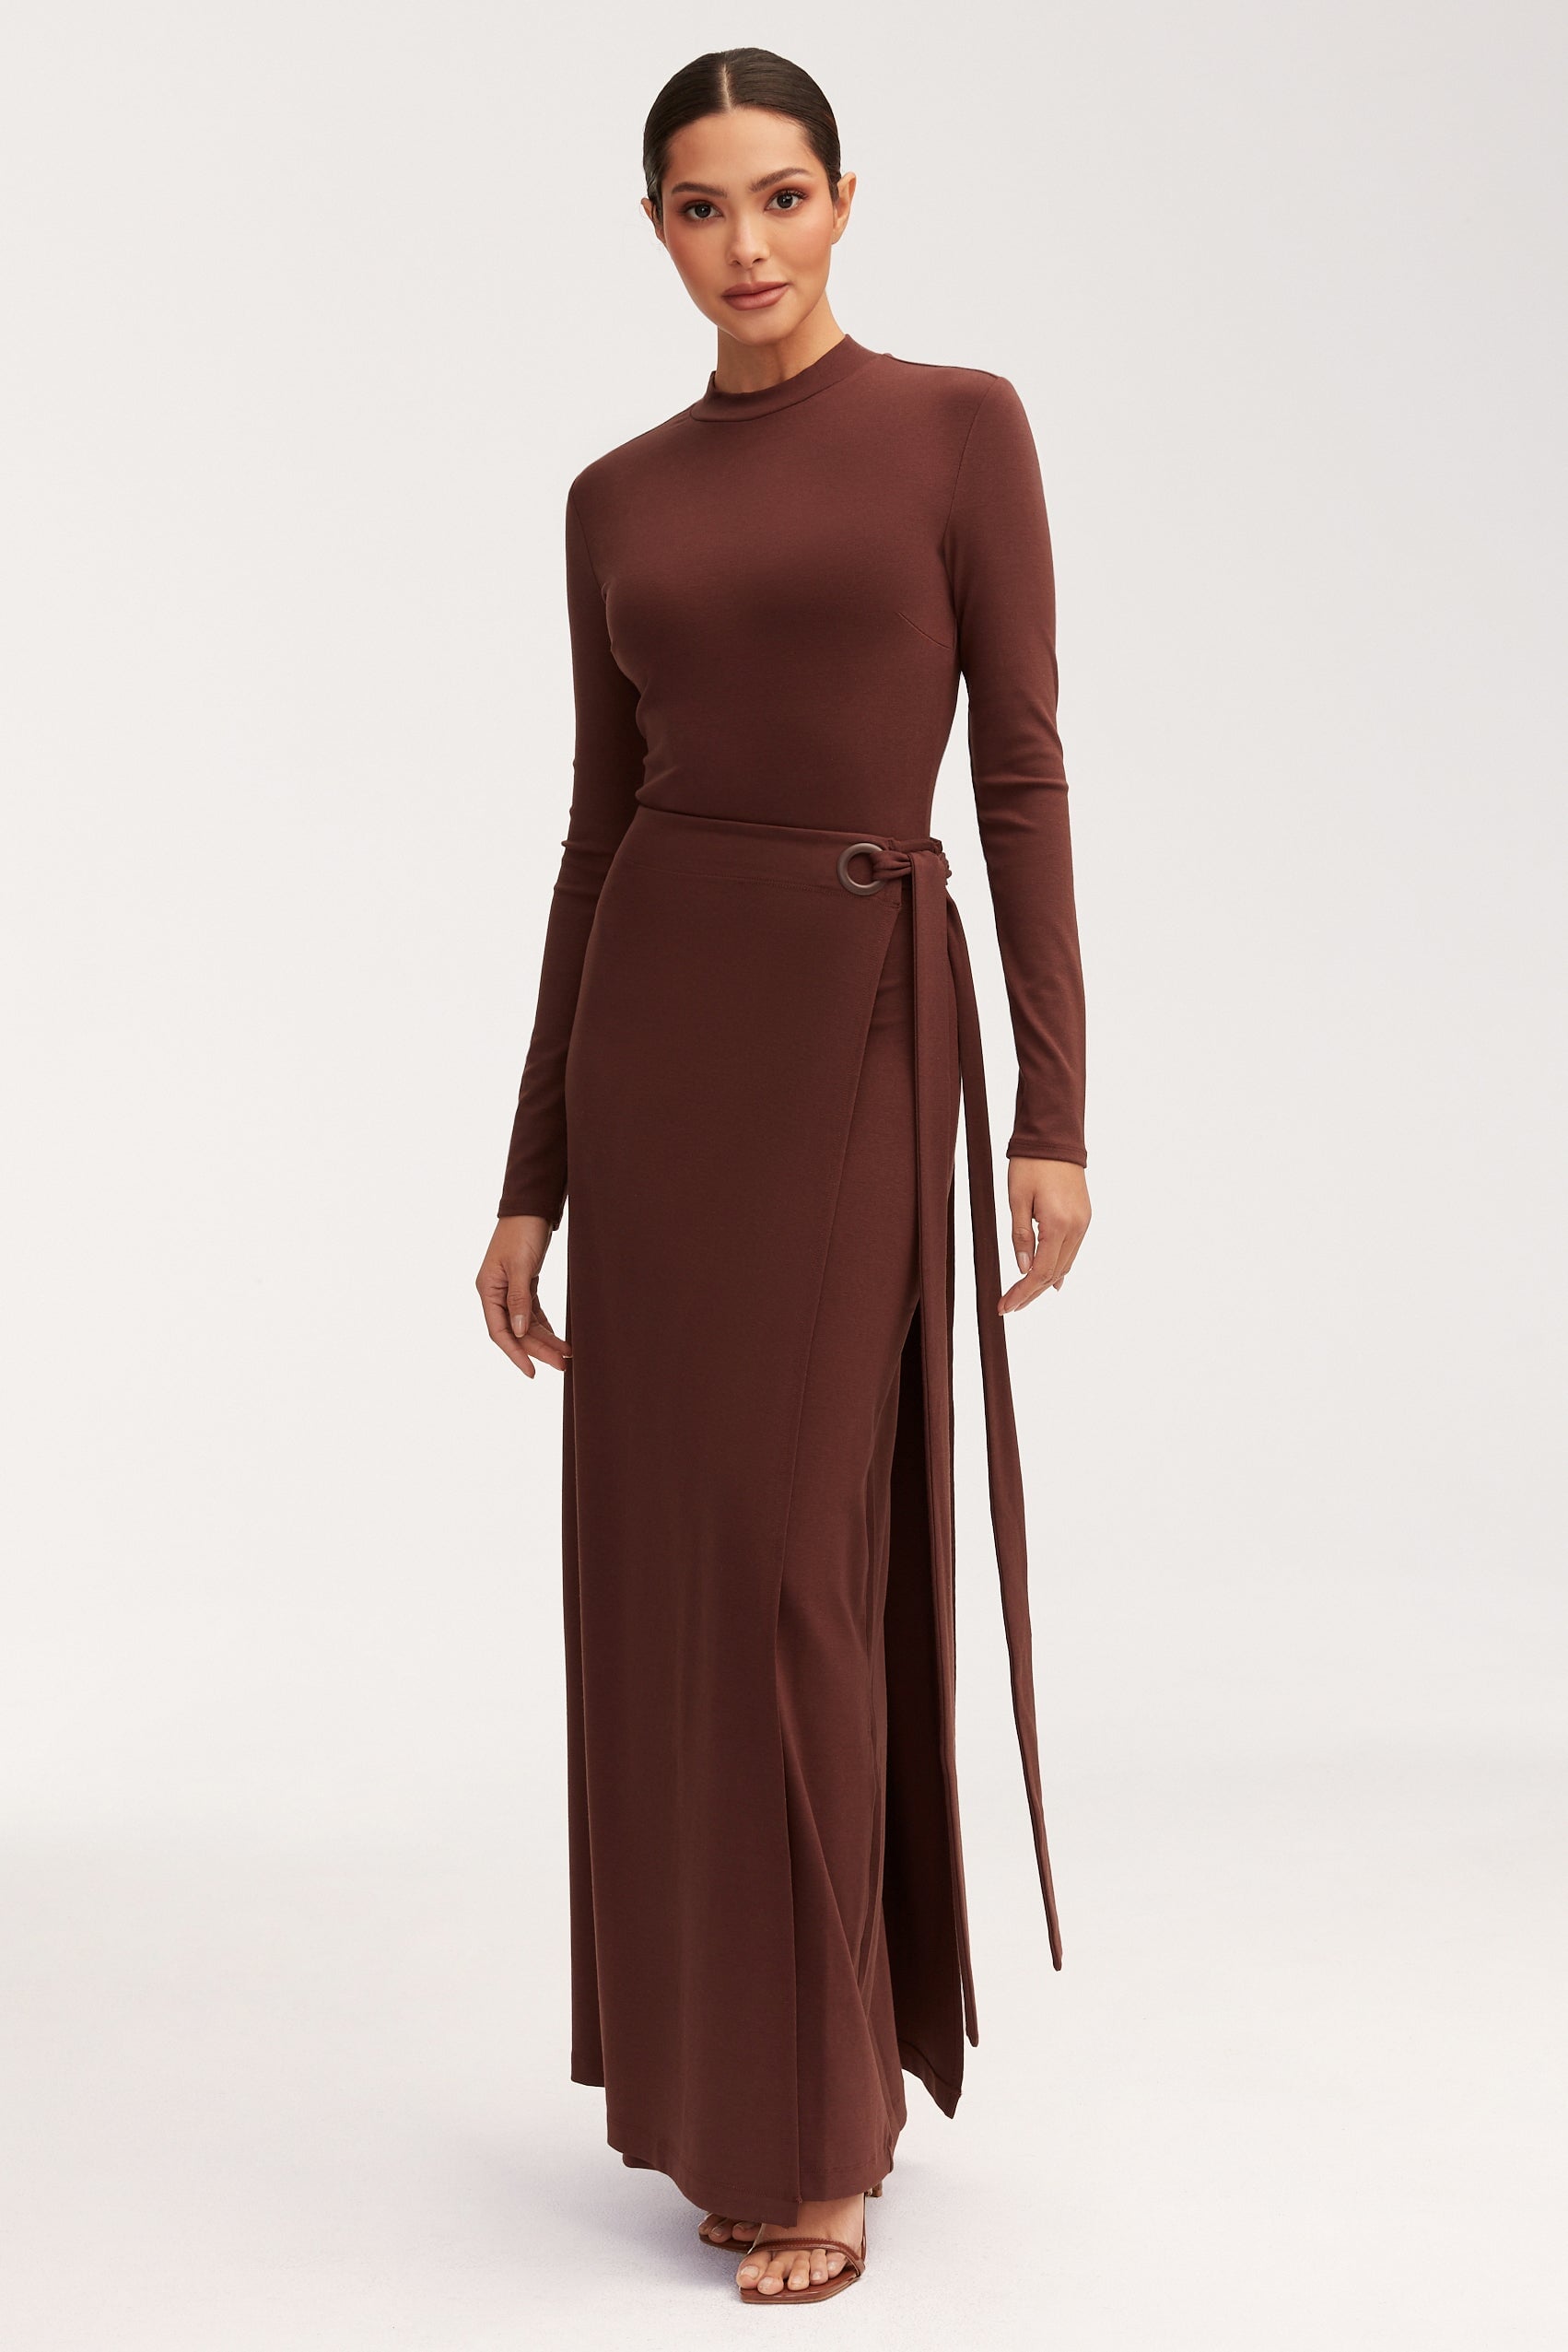 Melissa Jersey Maxi Dress with Wrap Skirt - Brown Sets Veiled 